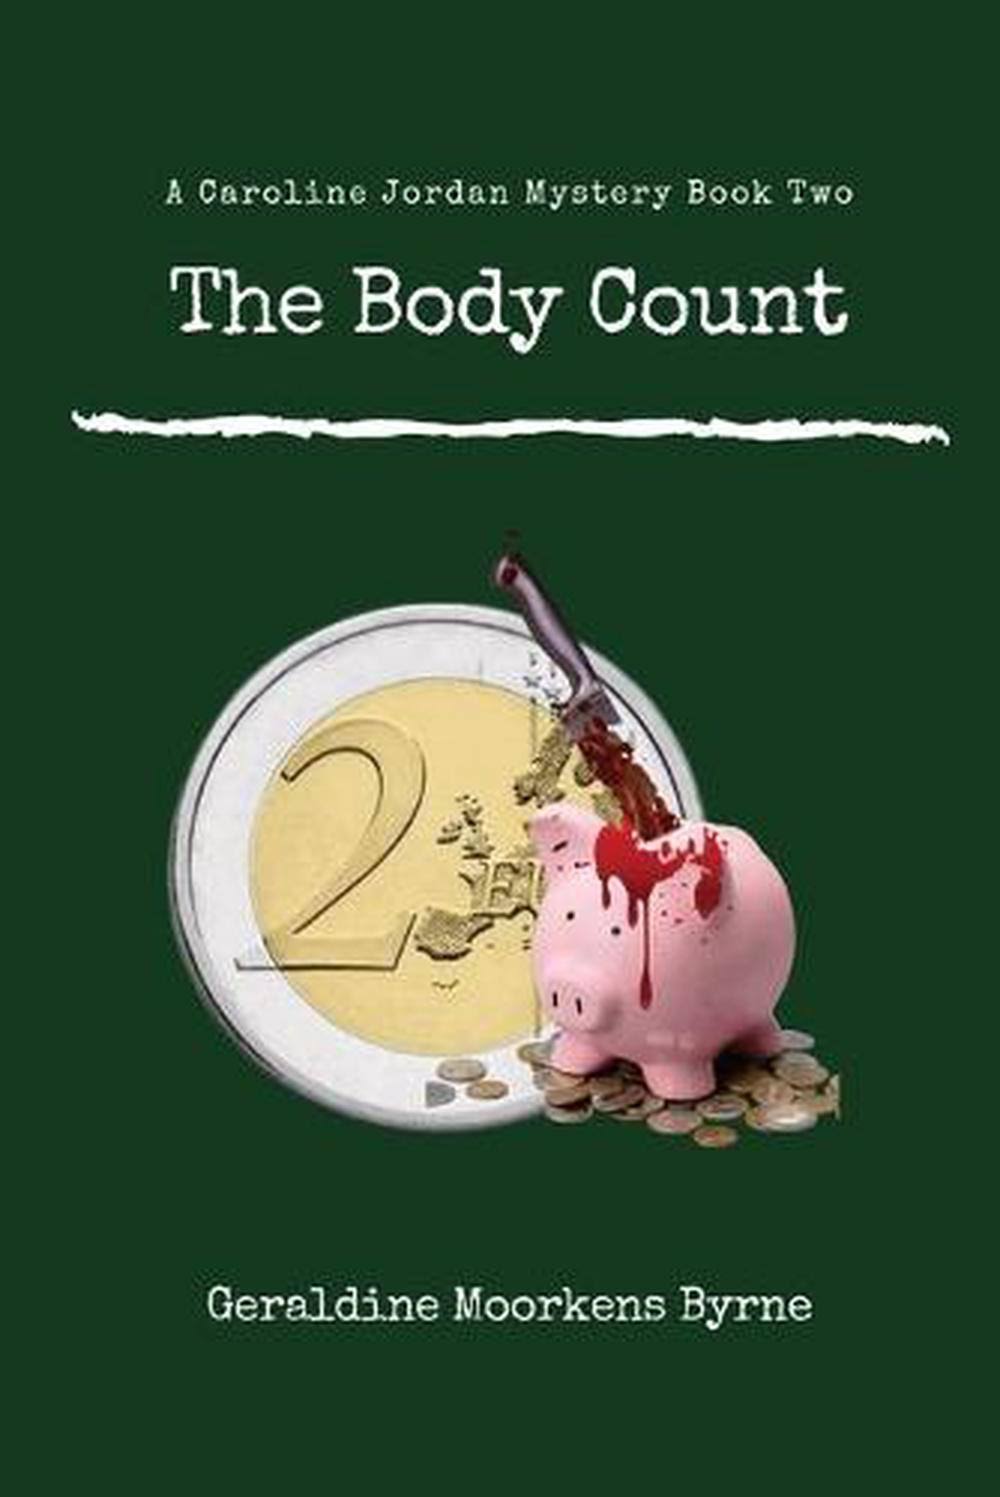 The Body Count